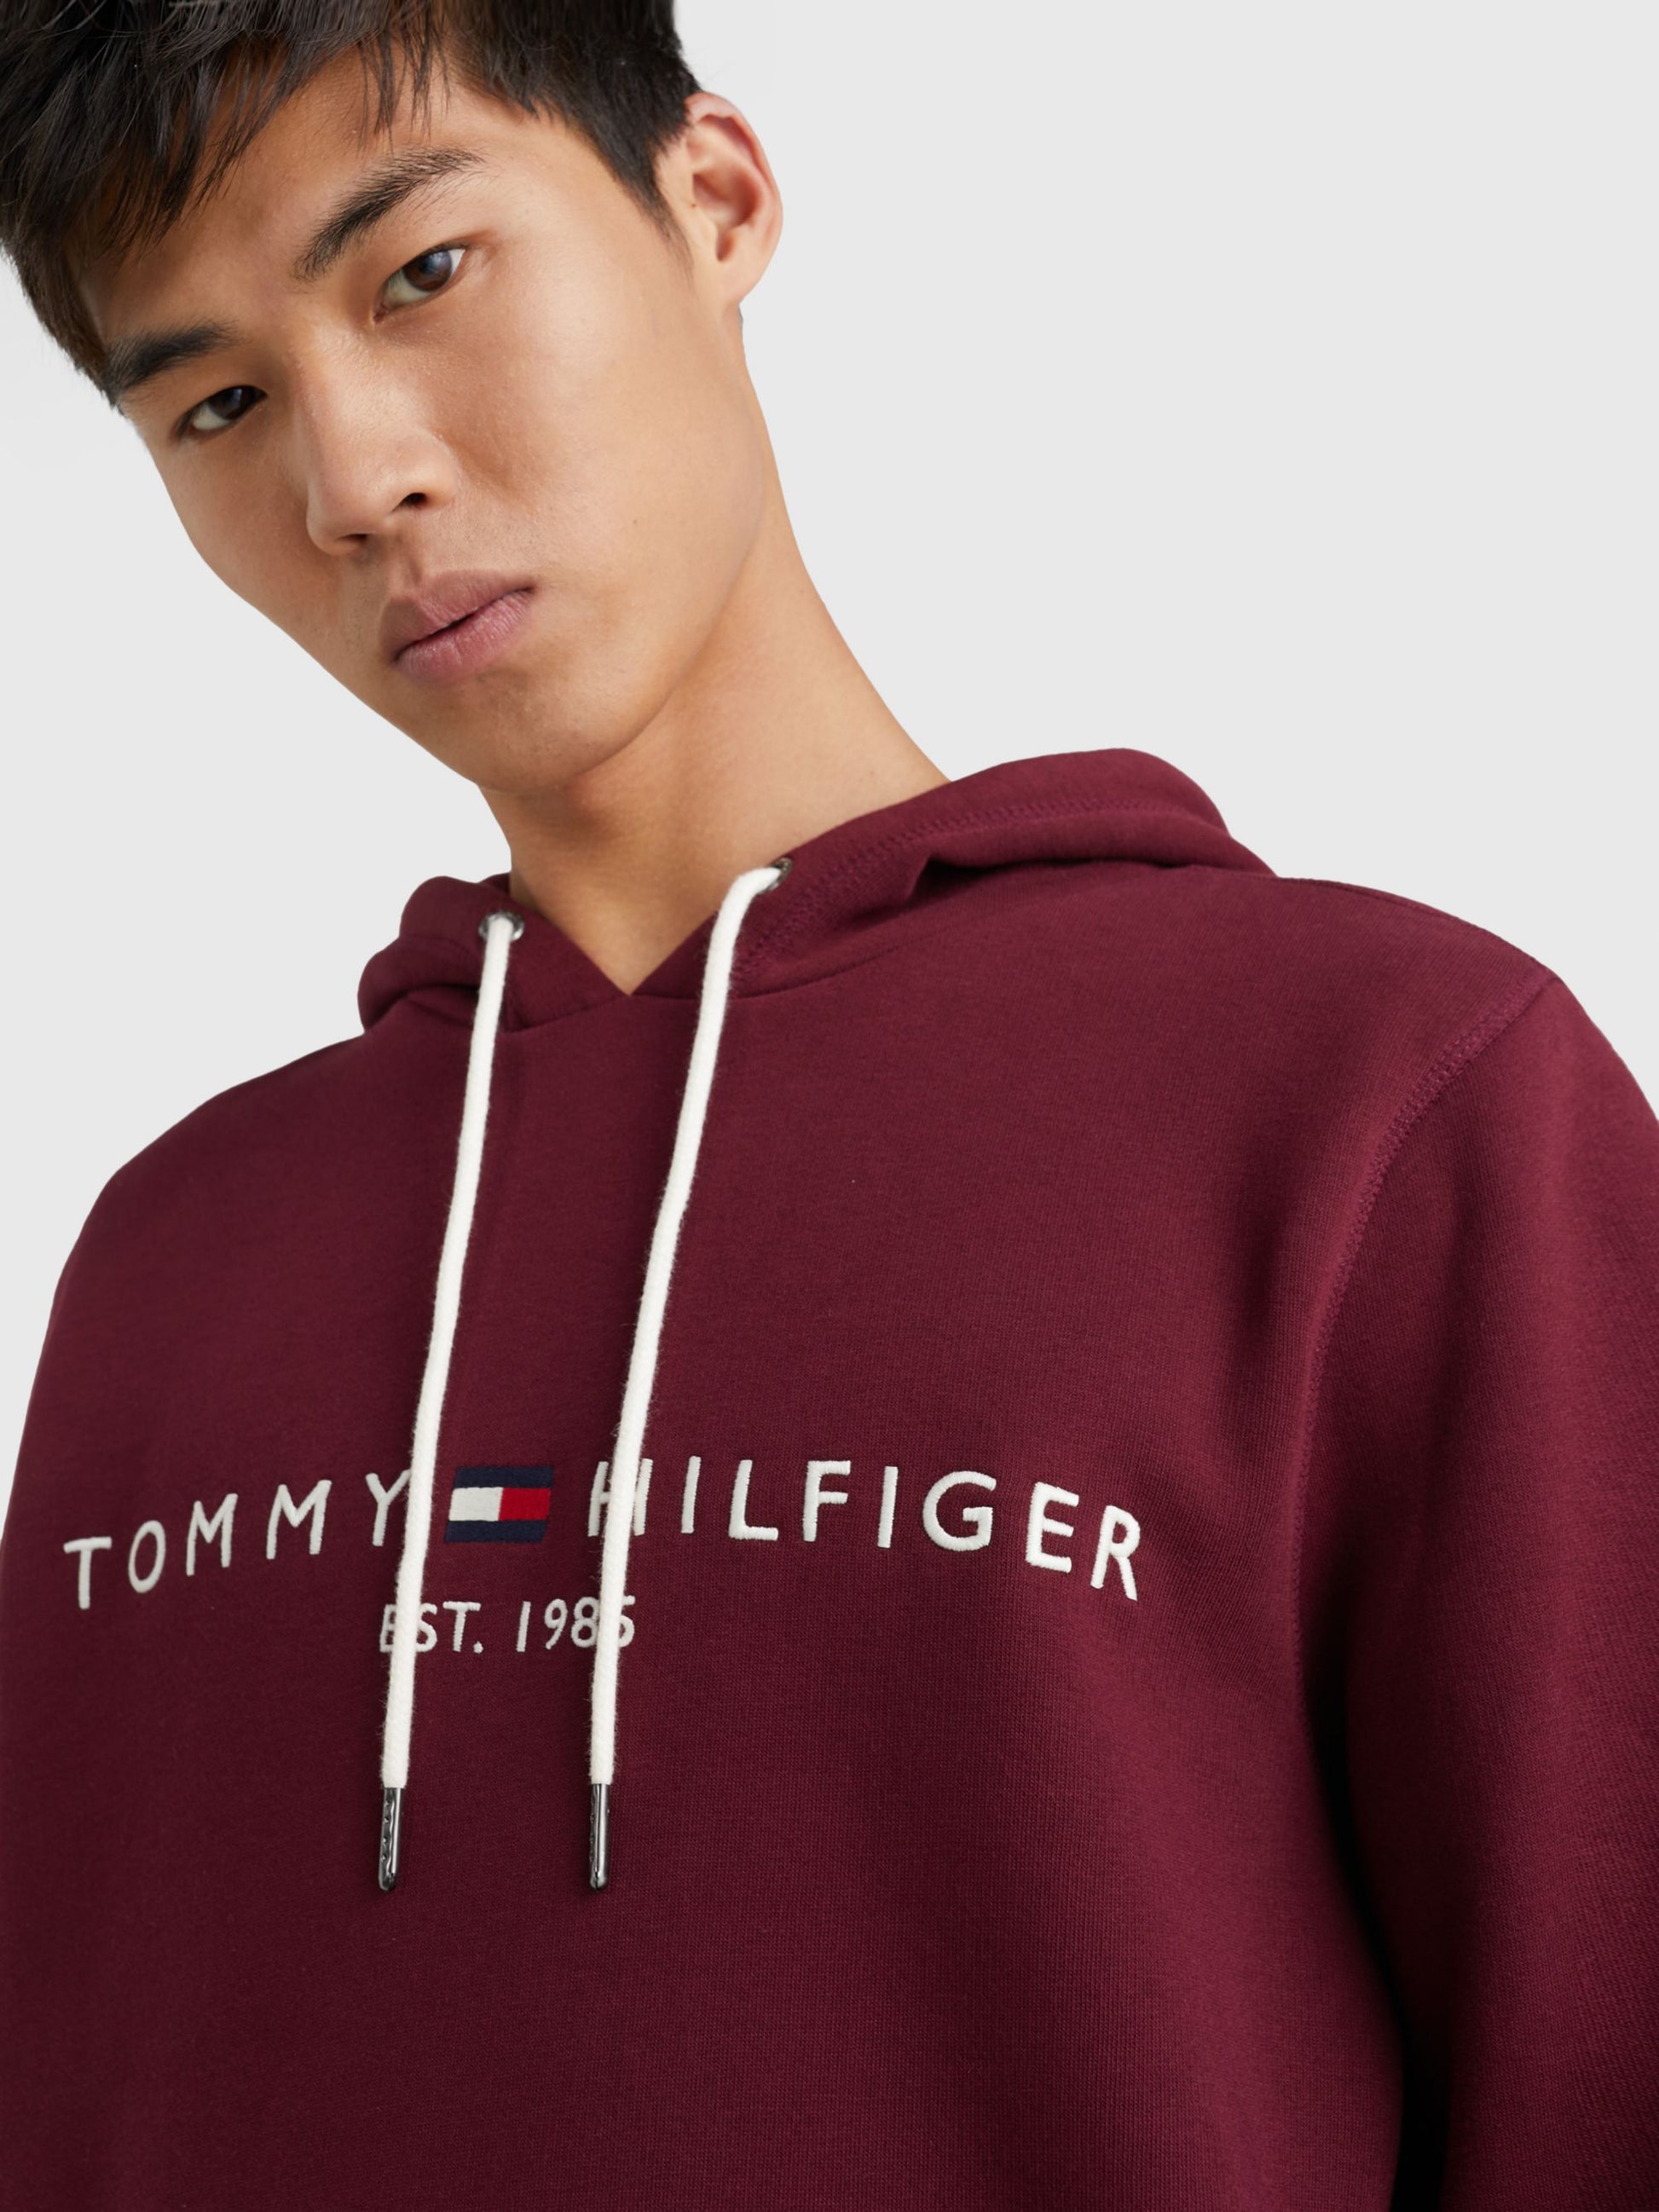 Tommy Hilfiger Tommy Logo Hoody Deep Rouge